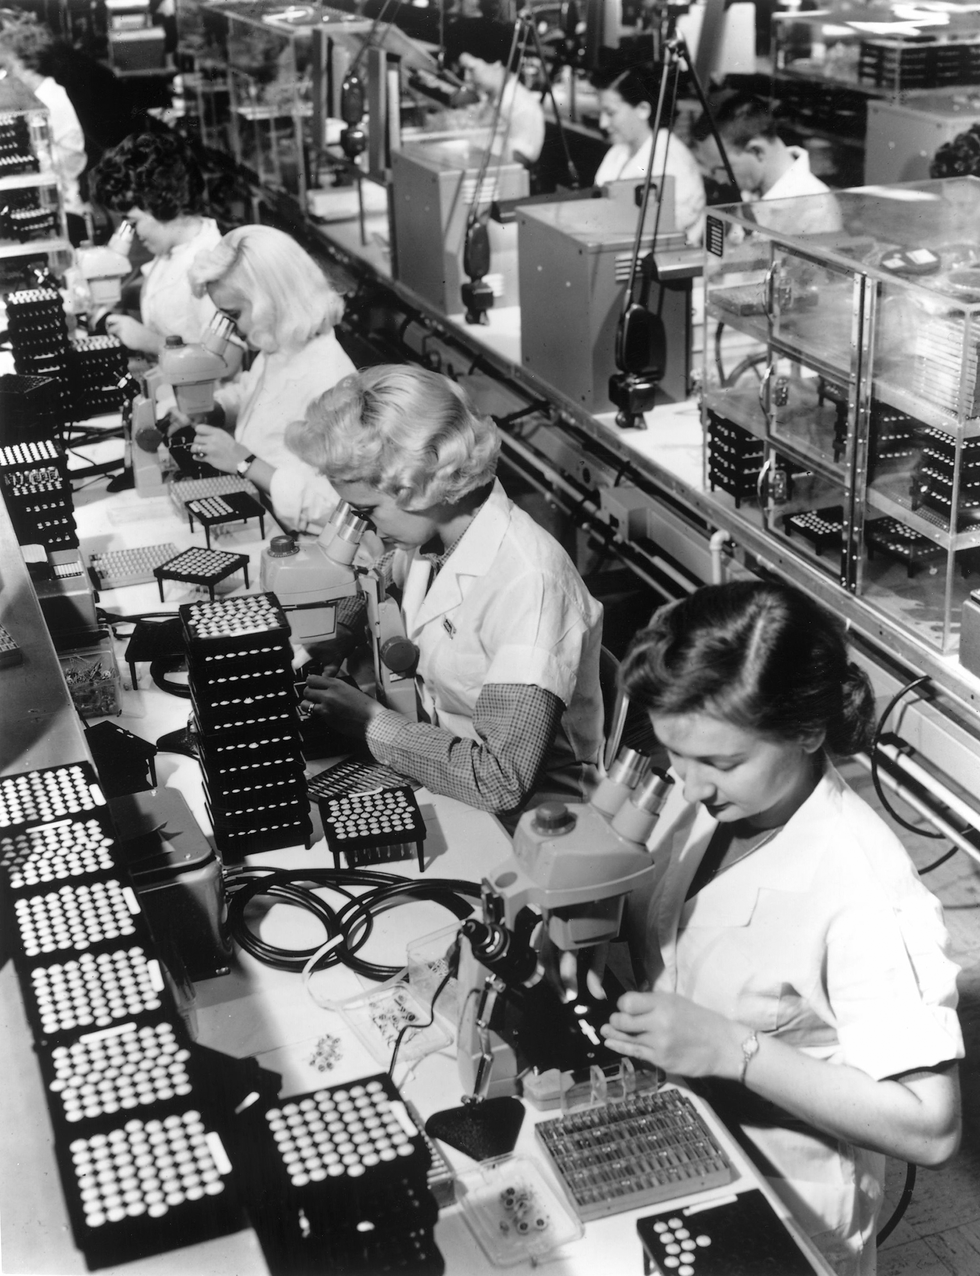 A photo of rows of people sitting in front of microscopes and stacks of transistors.